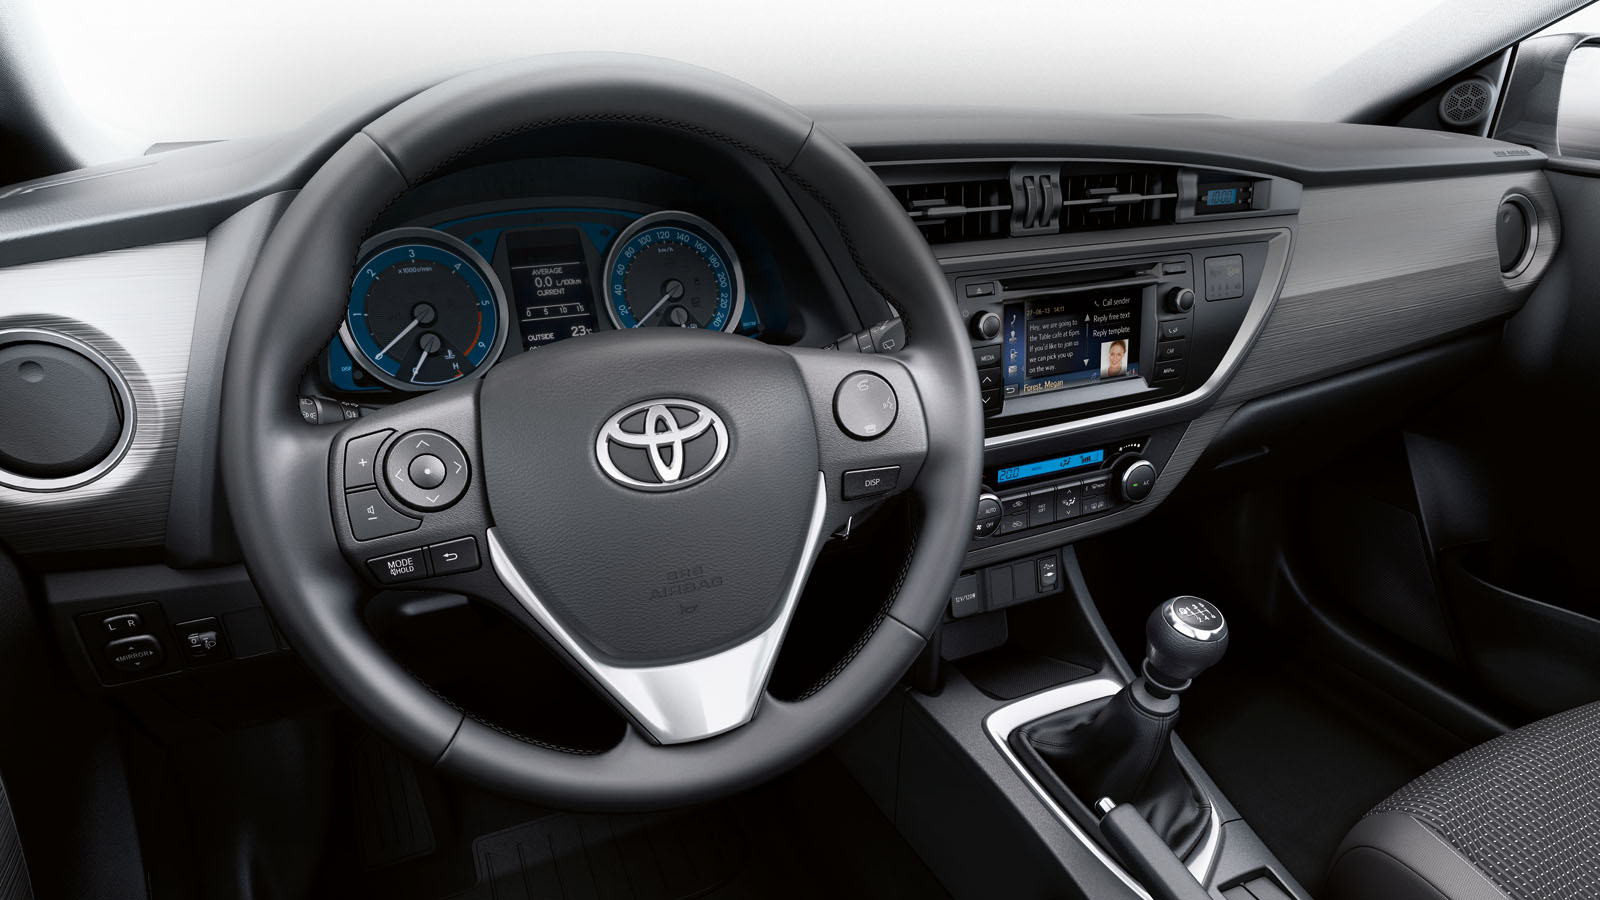 mobile phones compatible with toyota bluetooth #3